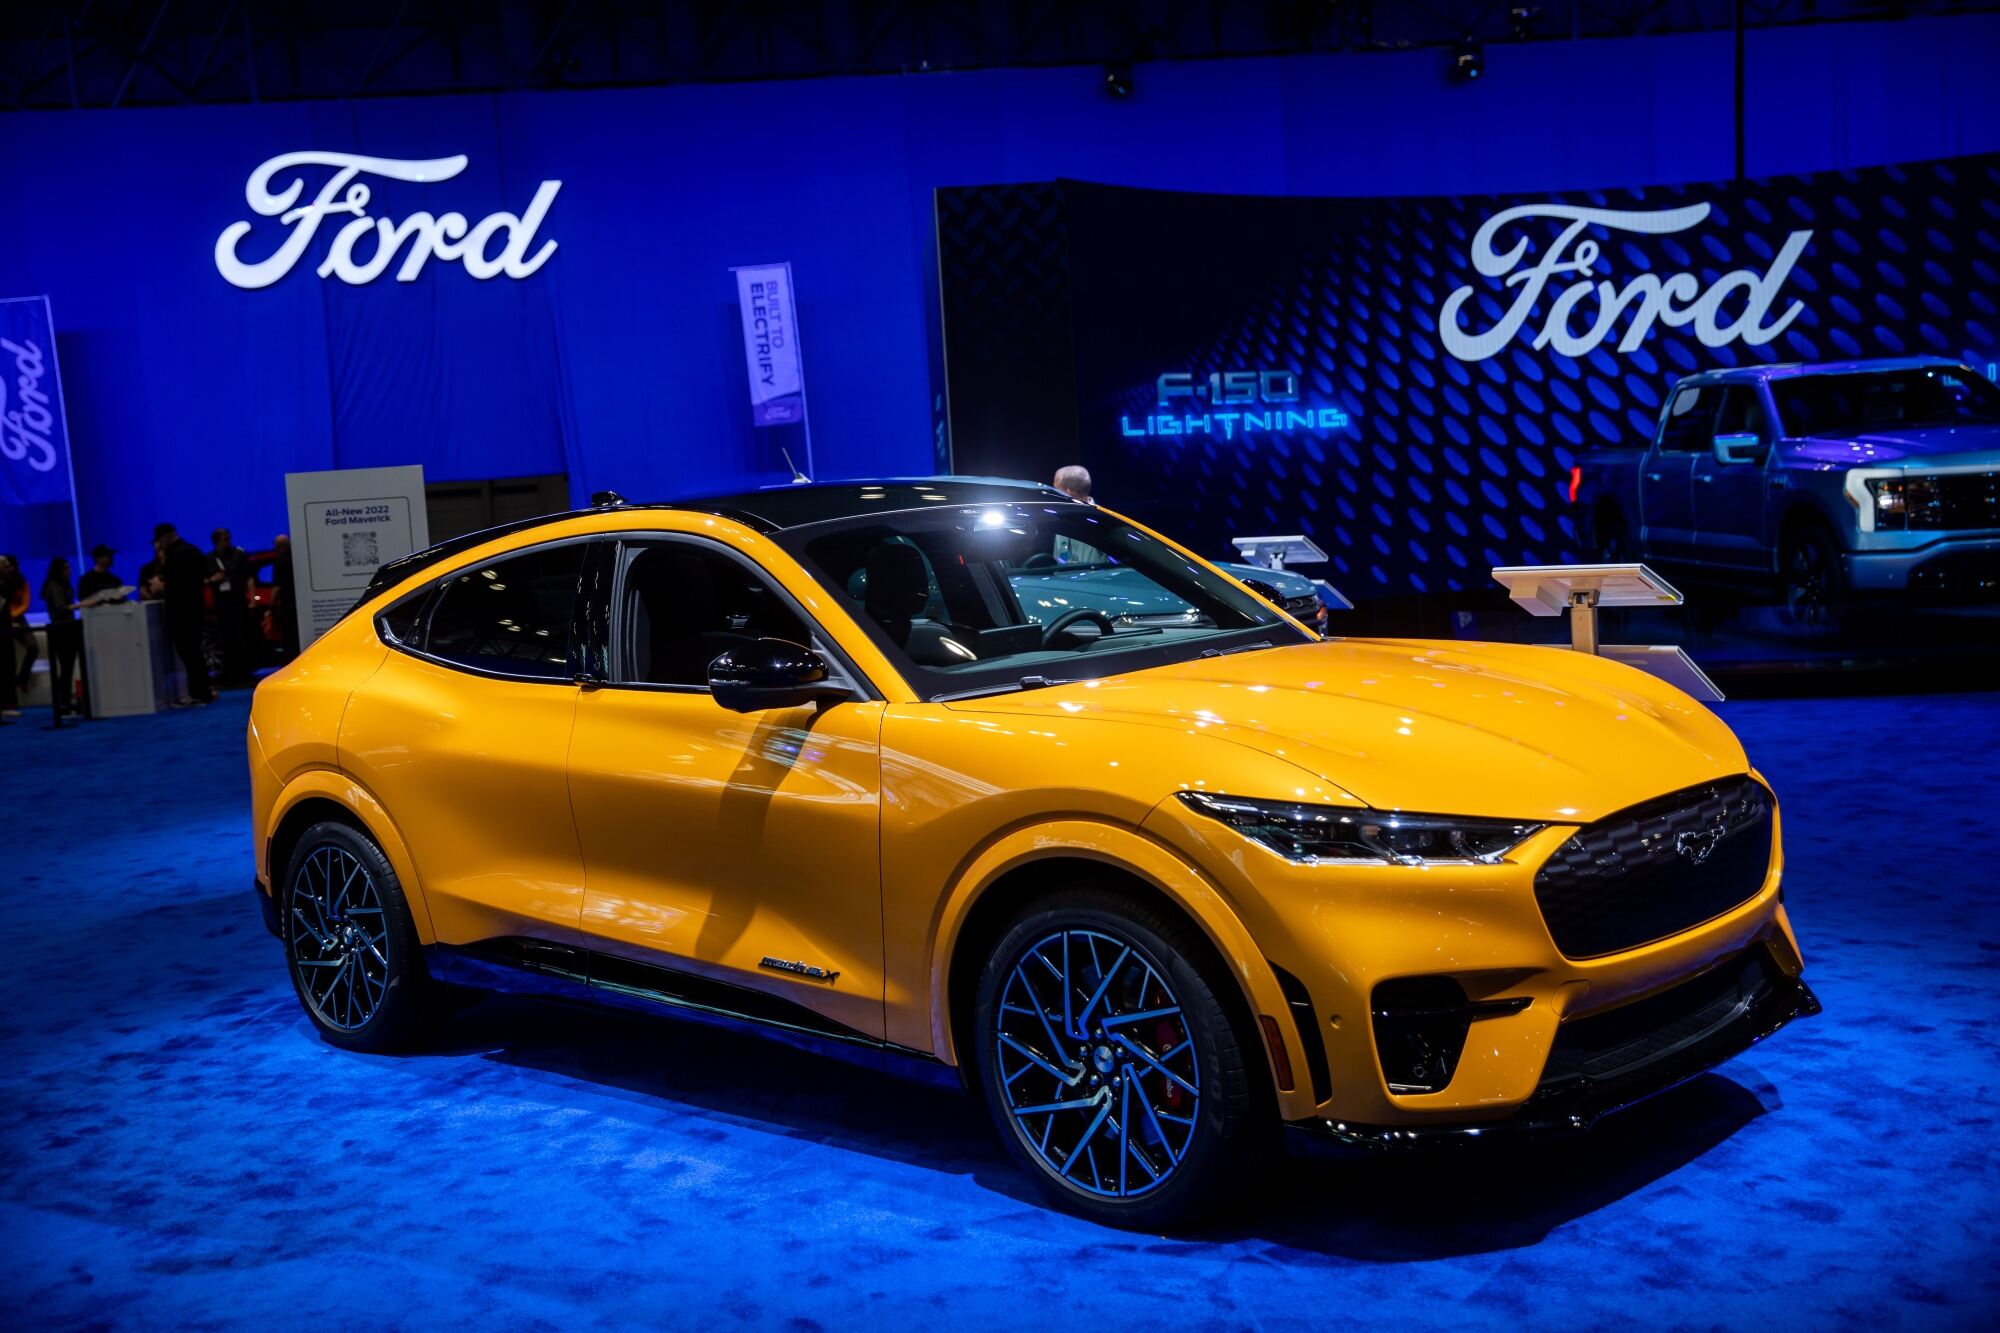 Ford Slashes Prices On Electric Mustang Mach-E Amid Softening Demand For Premium EVs